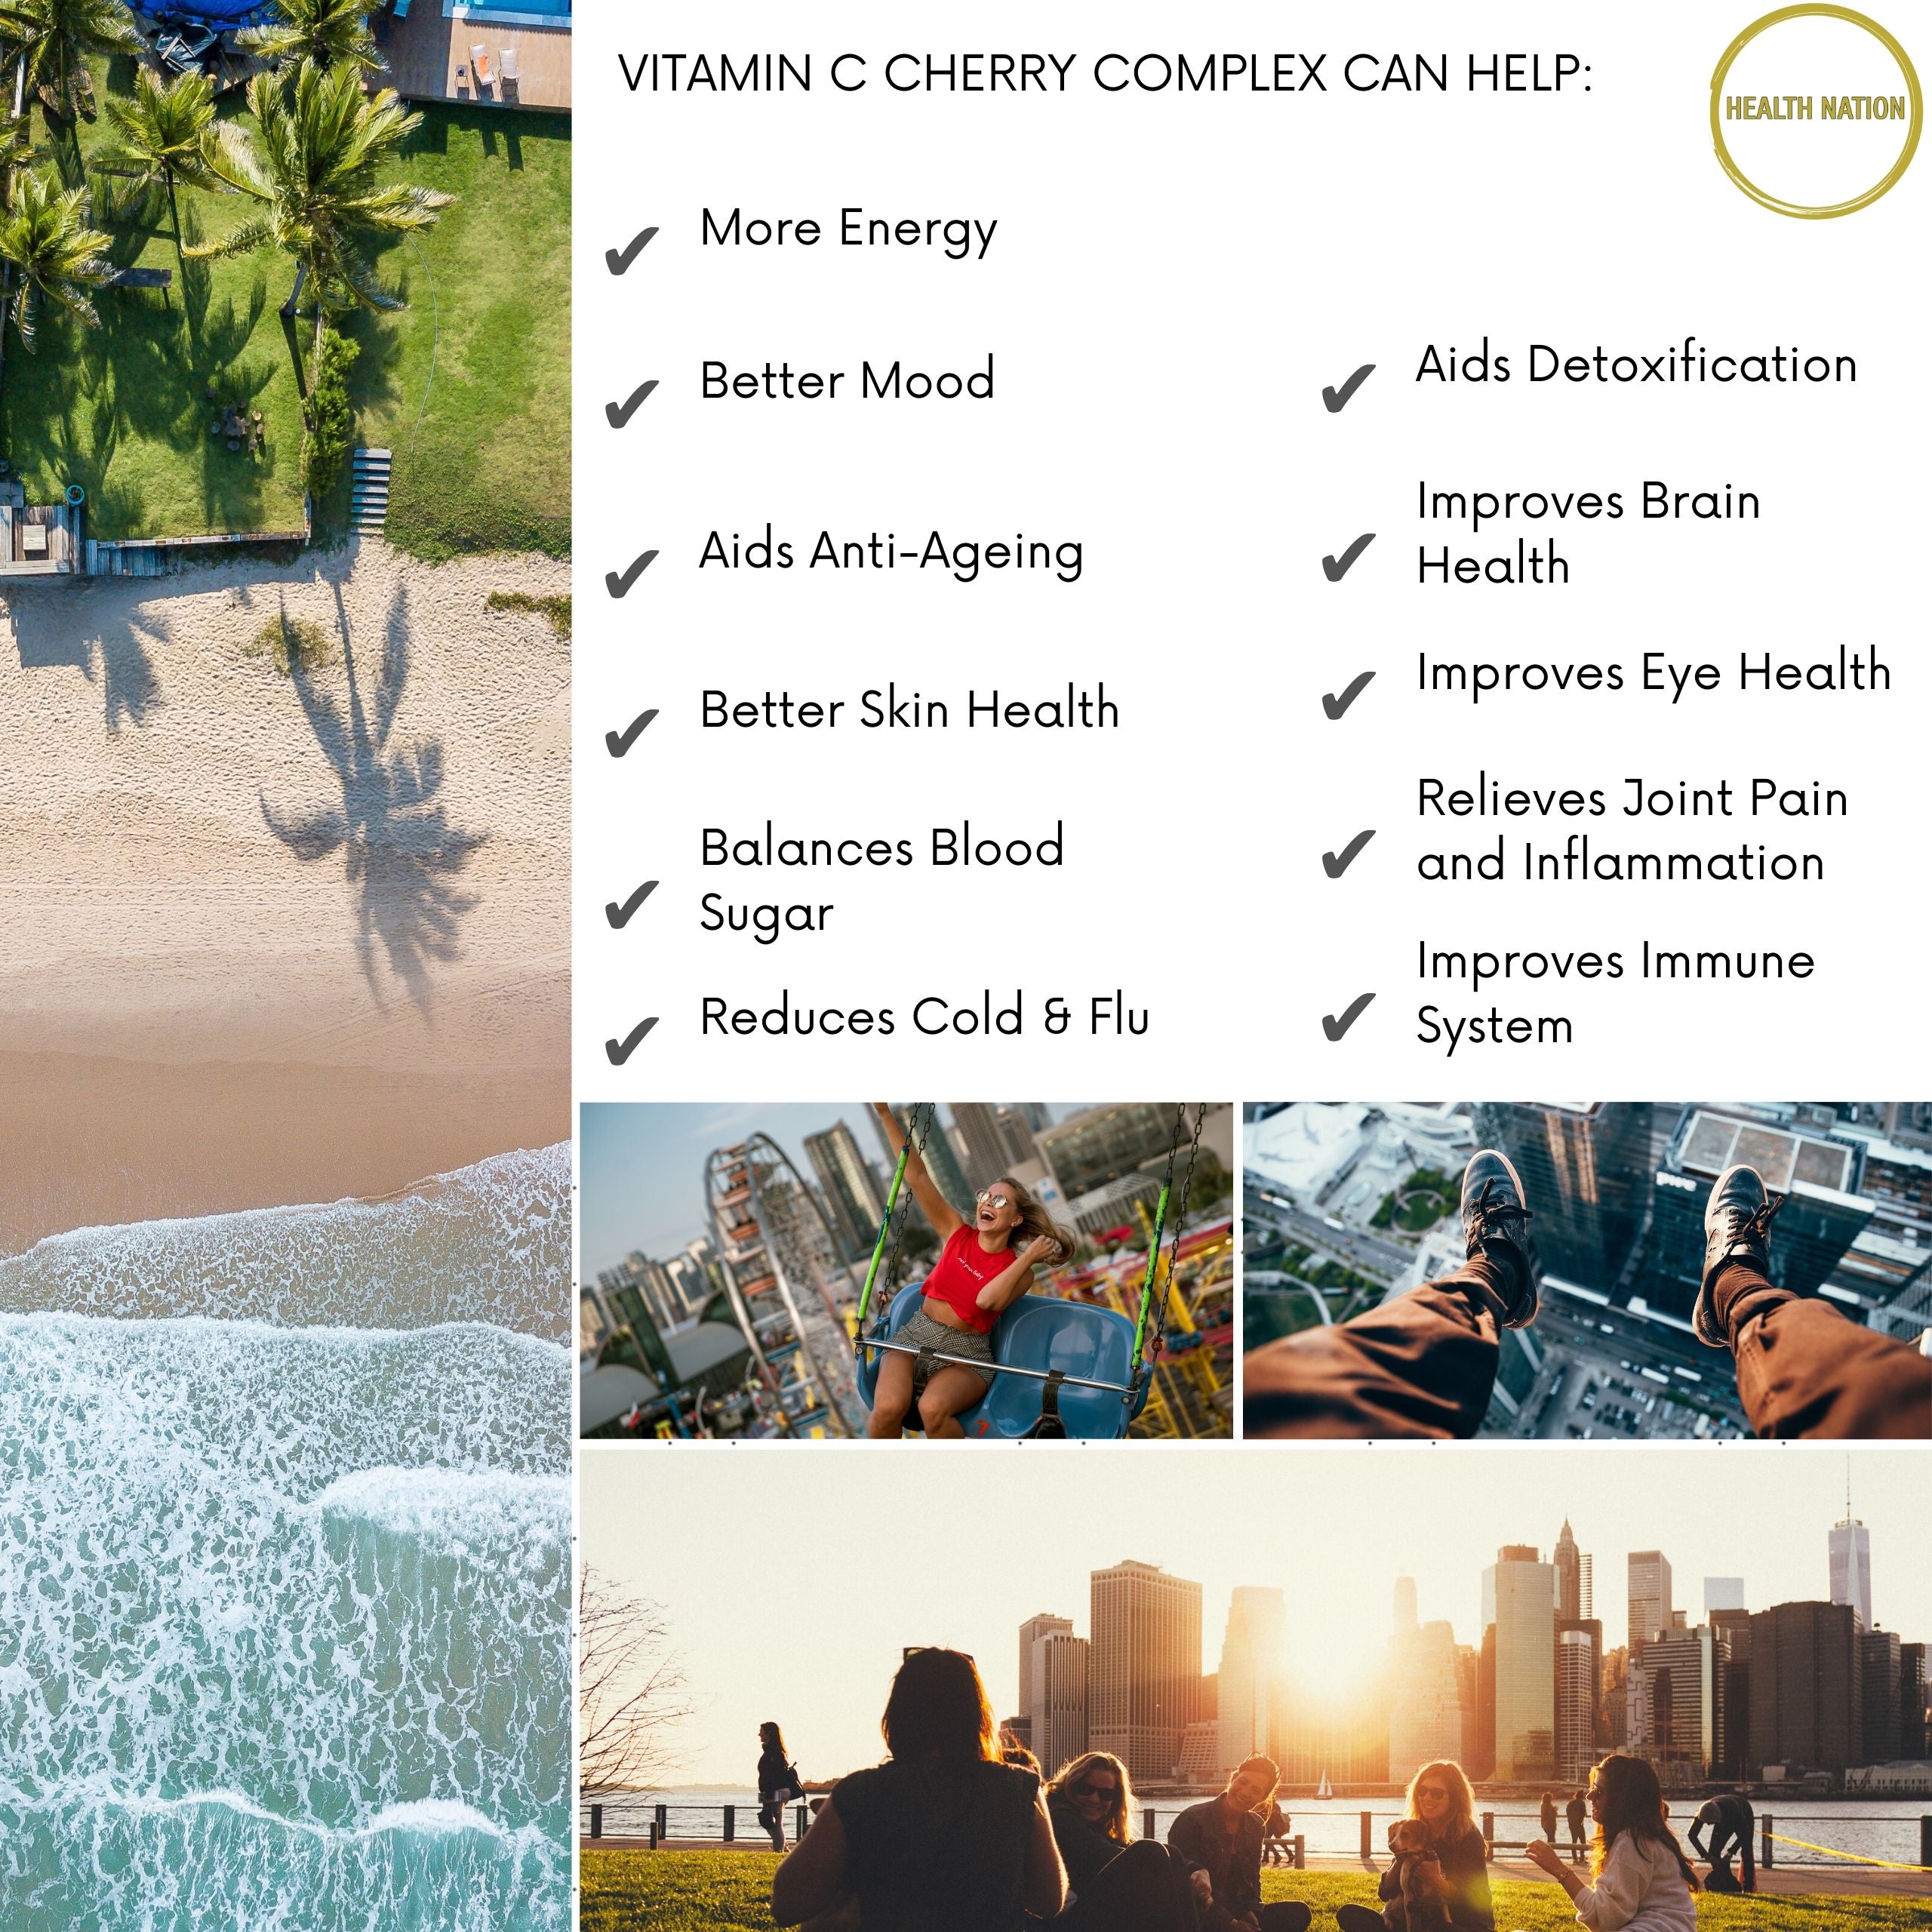 Natural Vitamin C Cherry Complex | Helps with Mental Clarity, Mood, Energy, Cold/Flu, Eye Health, Joint Pain, Anti-Ageing, Balances Blood Sugar, Detox and Vibrant Skin | Made in UK | 60 Capsules - Health Nation